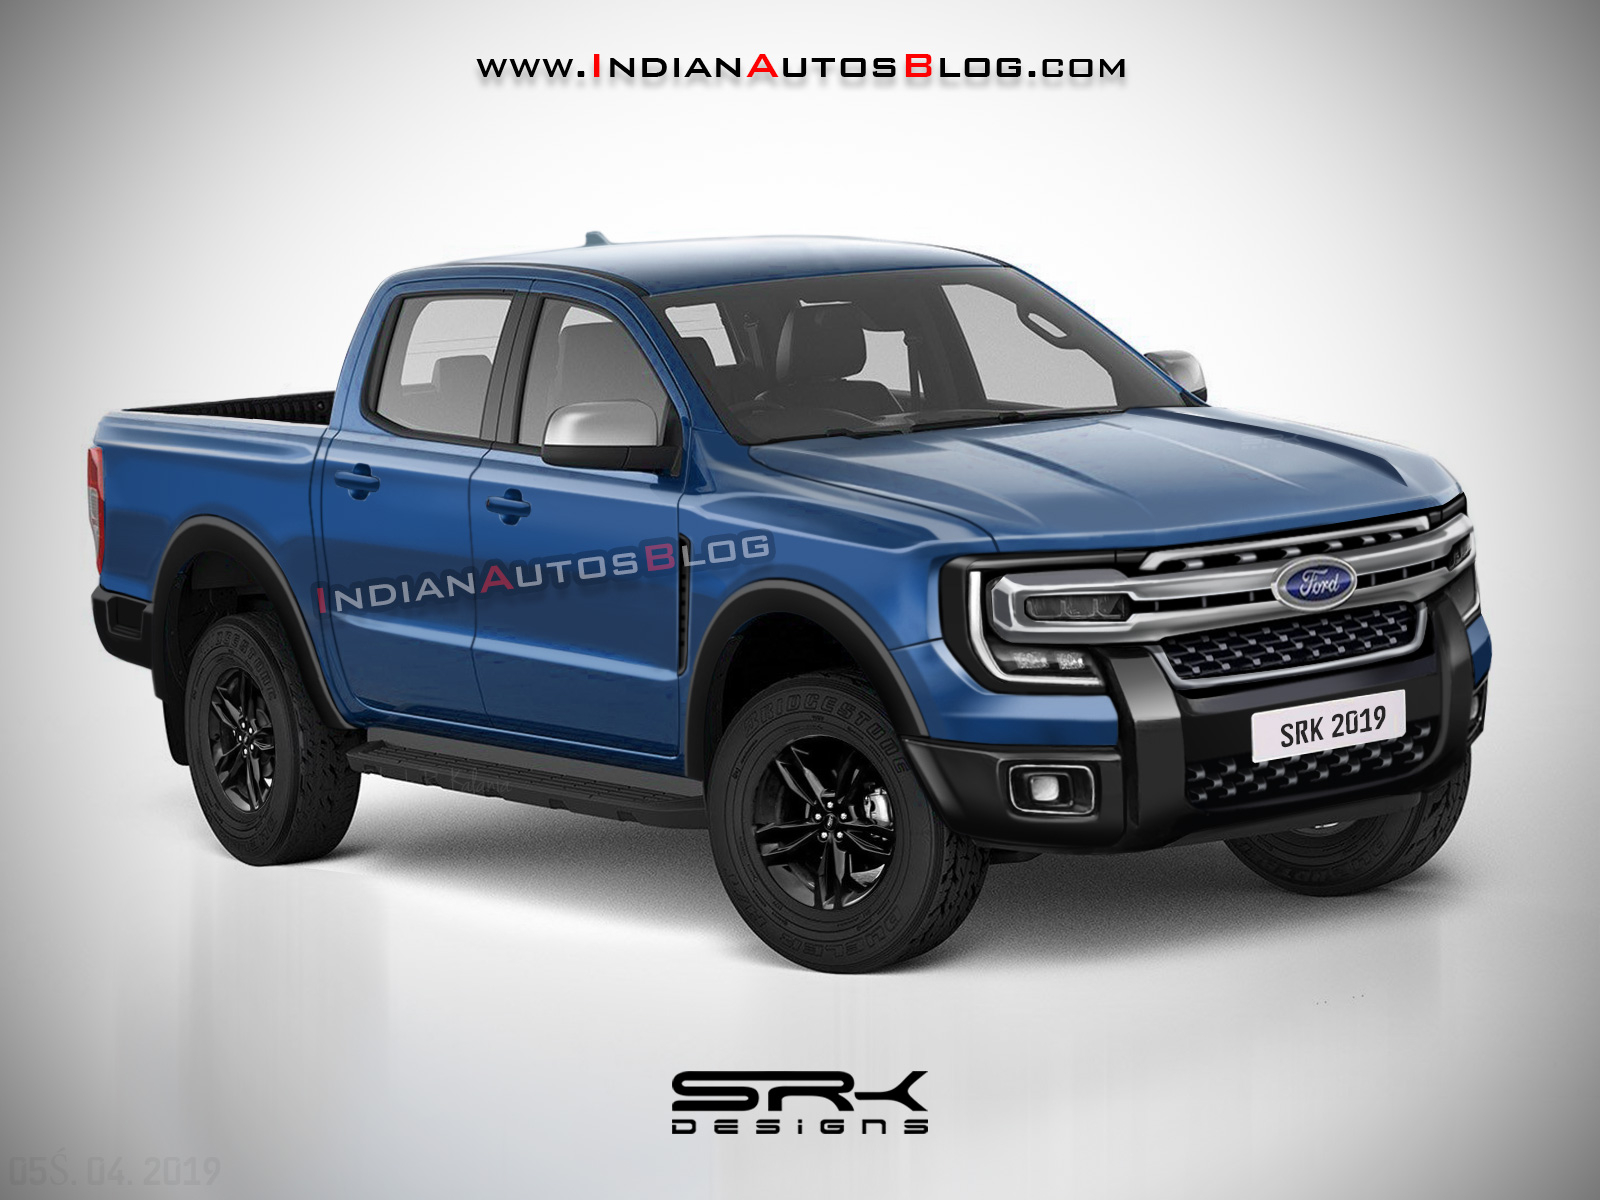 As we get closer to the unveiling of the all-new Ford Ranger and ...